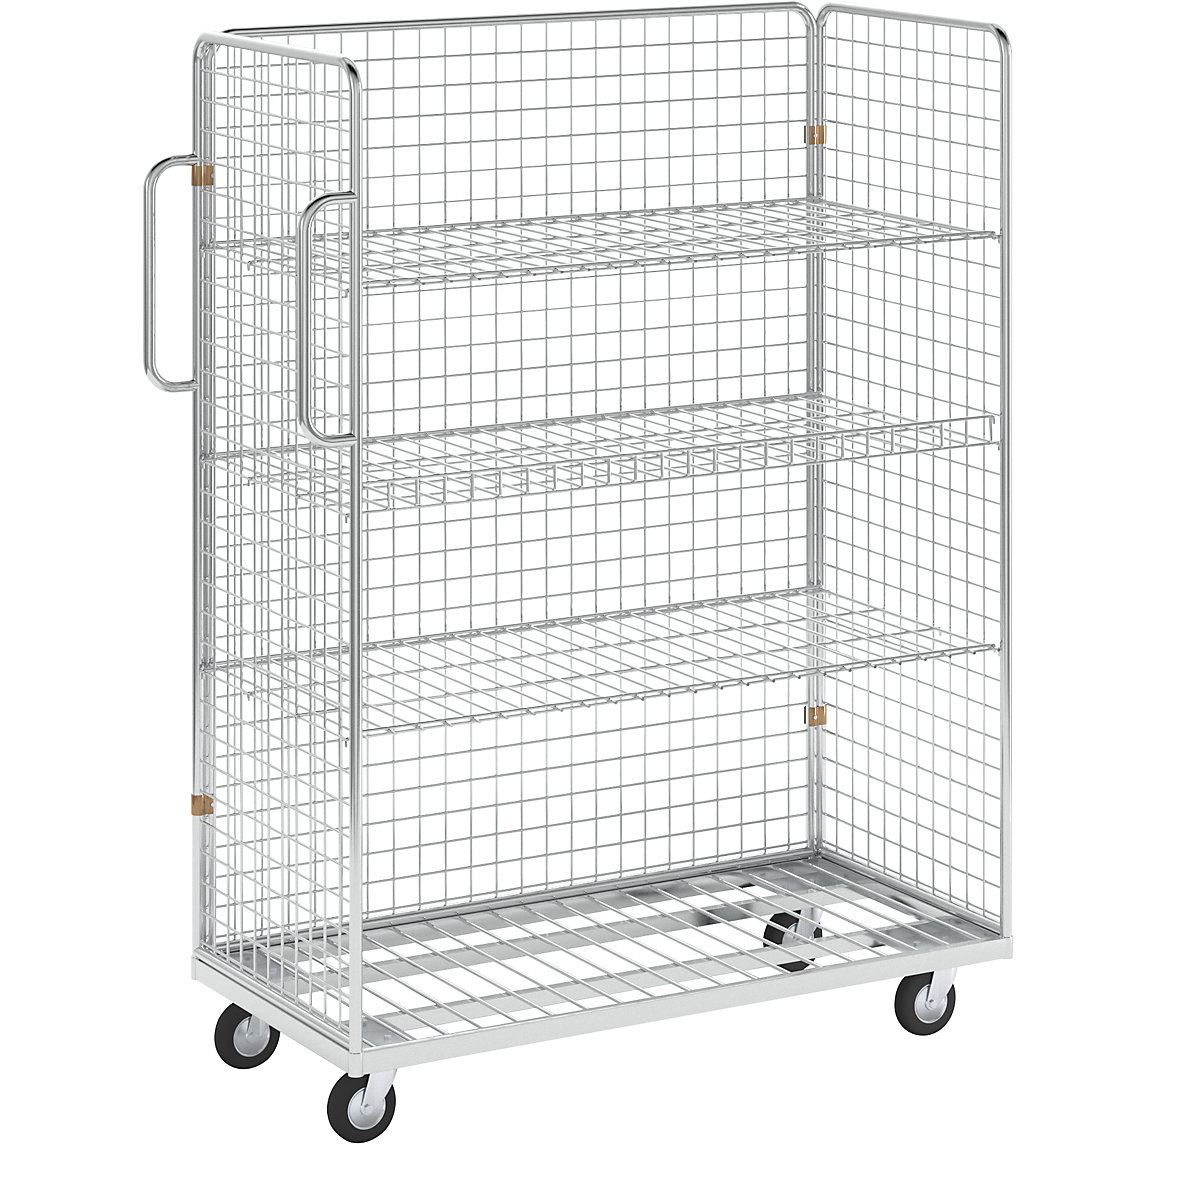 Order picking trolley, overall max. load 300 kg, external dimensions WxDxH 1295 x 600 x 1600 mm-10